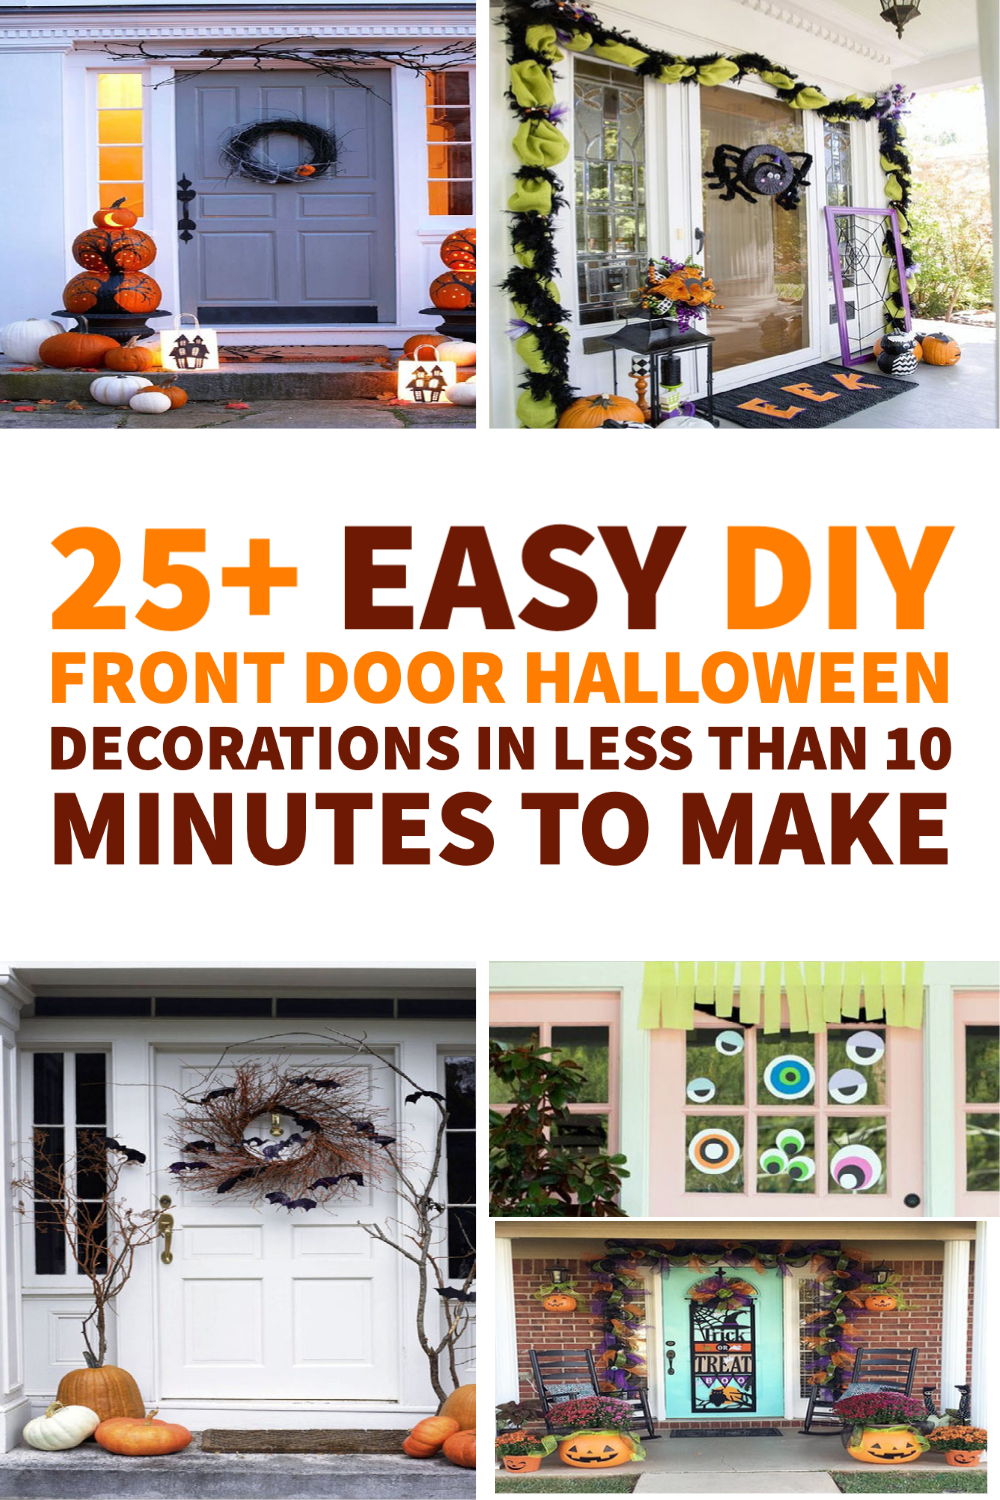 25 Easy DIY Front Door Halloween Decorations In Less Than 10 Minutes To Make